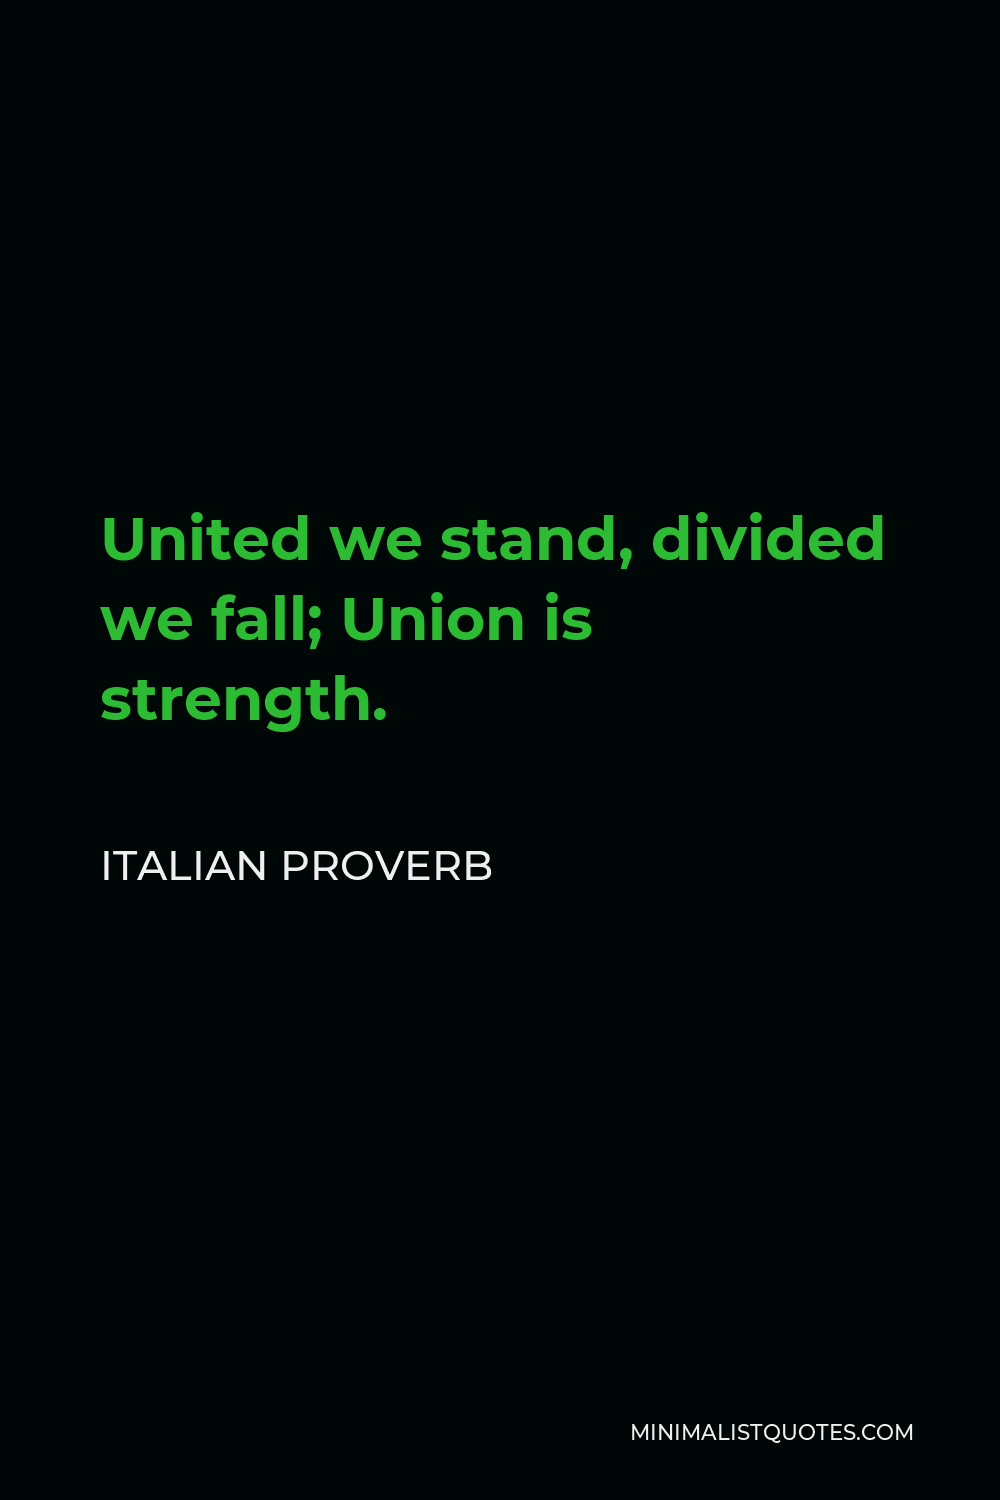 Italian Proverb Quote - United we stand, divided we fall; Union is strength.